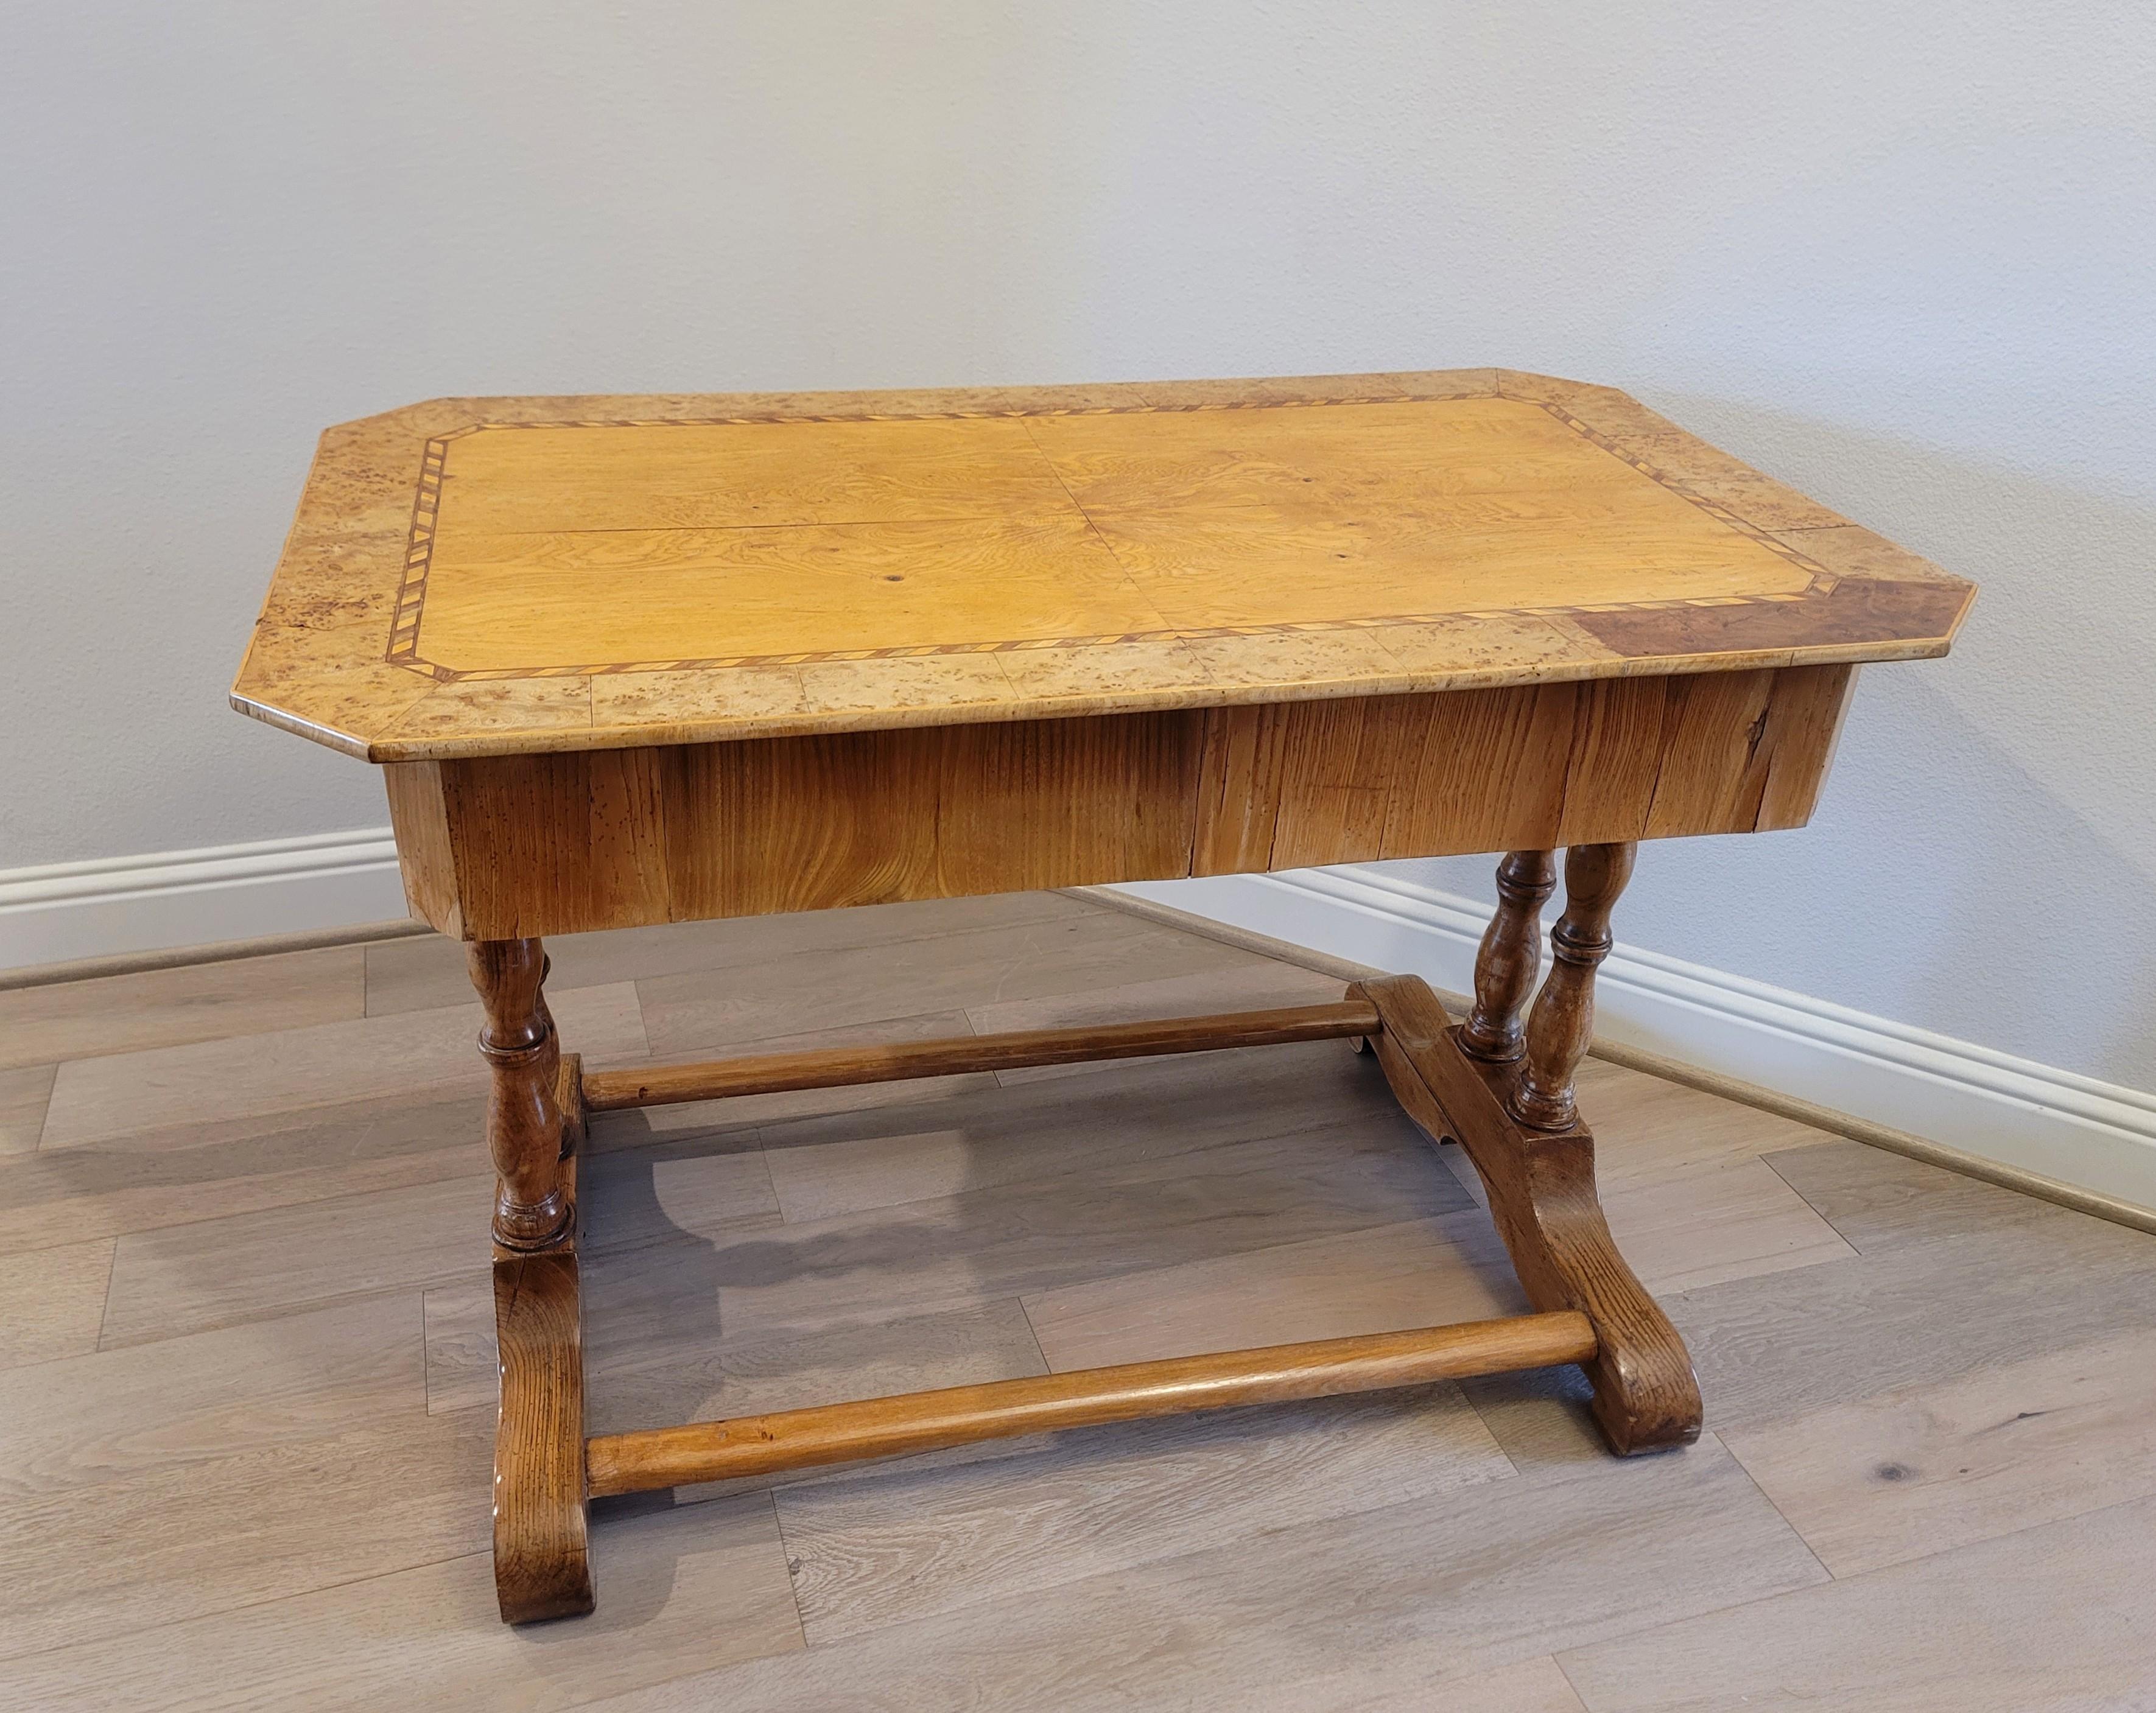 A scarce elegant and most distinctive Biedermeier Period (1815-1848) highly figured maple table.

Hand-made in Continental Europe in the early/mid-19th century, understated elegance and utilitarian design, this nearly 200 year old table is